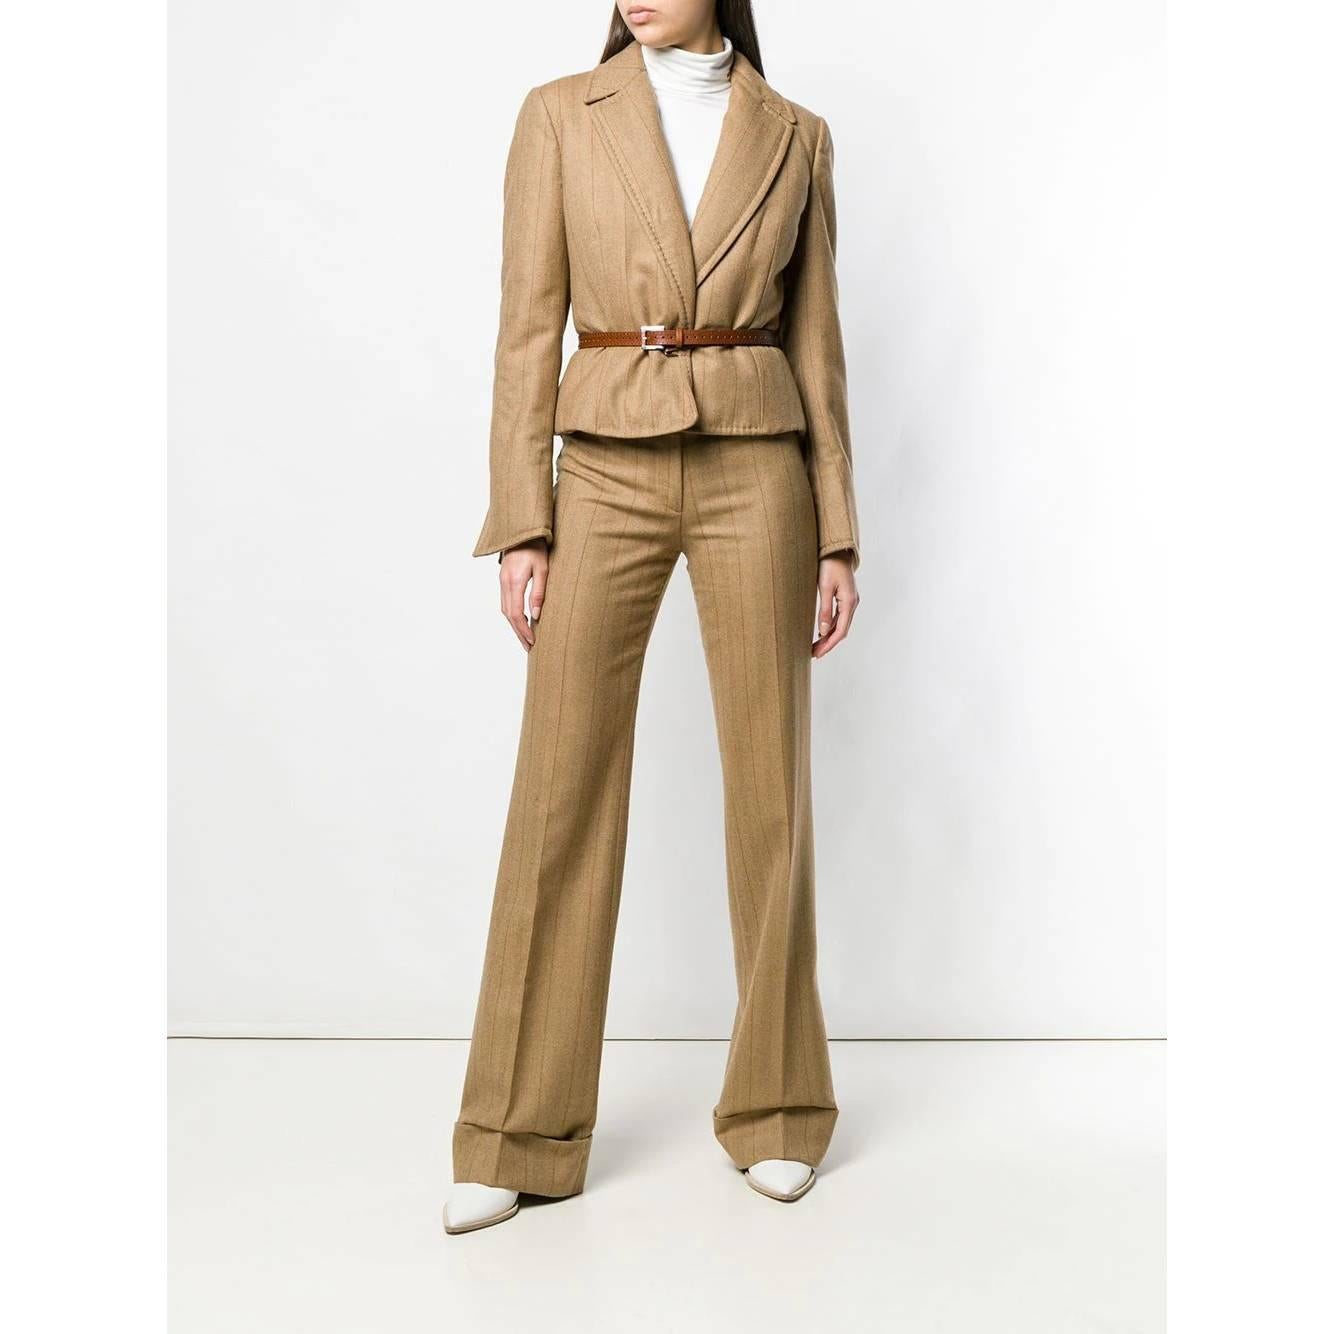 Gianfranco Ferré beige virgin wool trousers with thin vertical brown stripes. High waist, front closure with zip, button and hook. Welt pockets, front fold and turn-up at the bottom.

Years: 90s

Made in Italy

Size: 42 IT

Flat